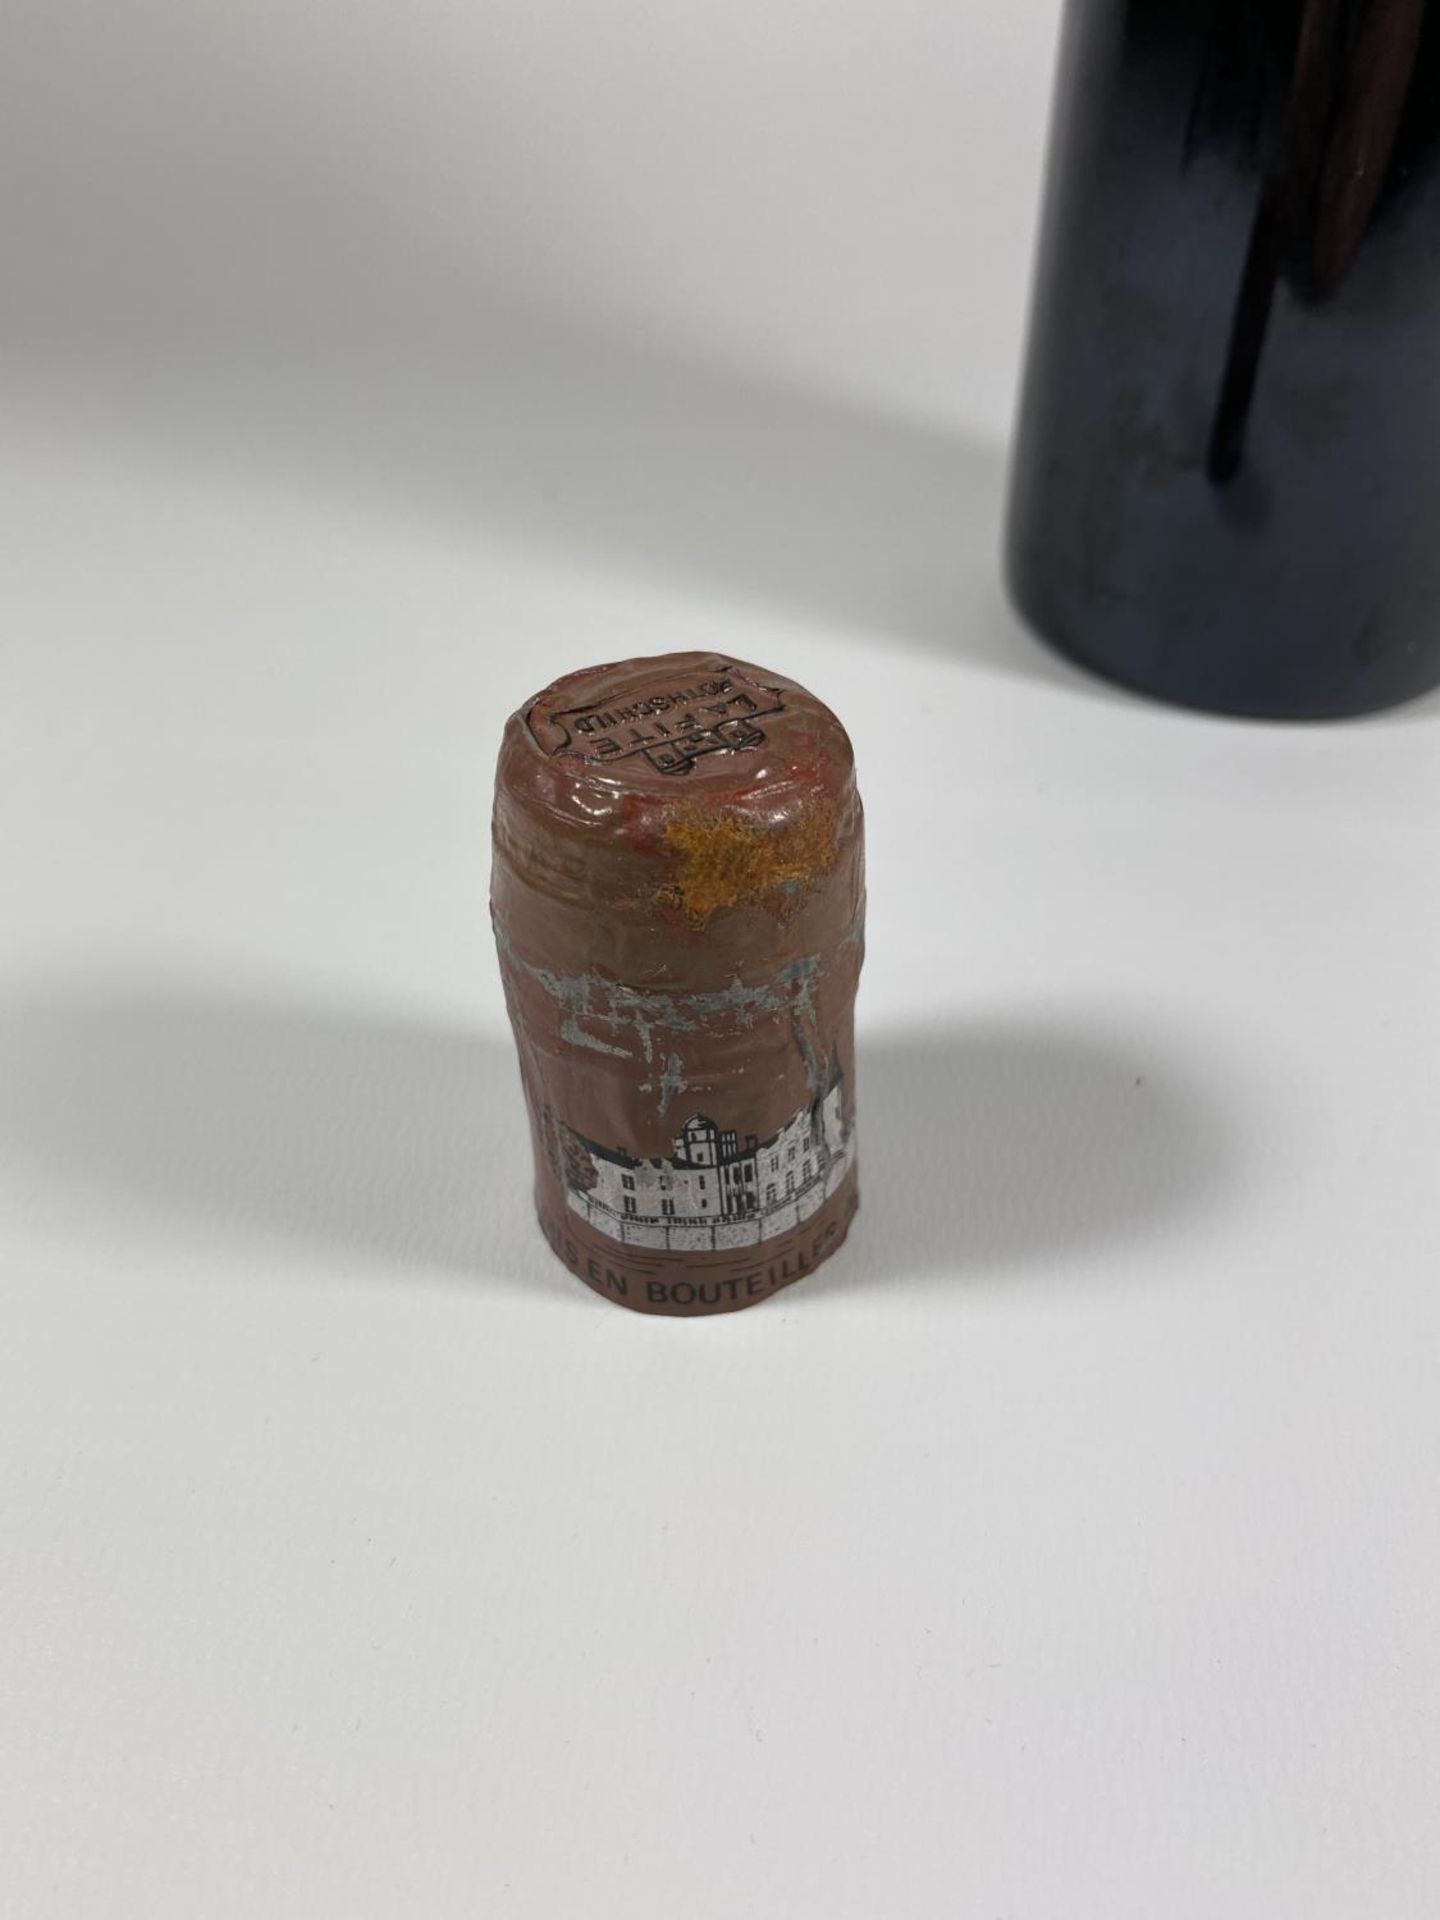 1 X 75CL BOTTLE - CHATEAU LAFITE ROTHSCHILD 1985 WINE - Image 6 of 8